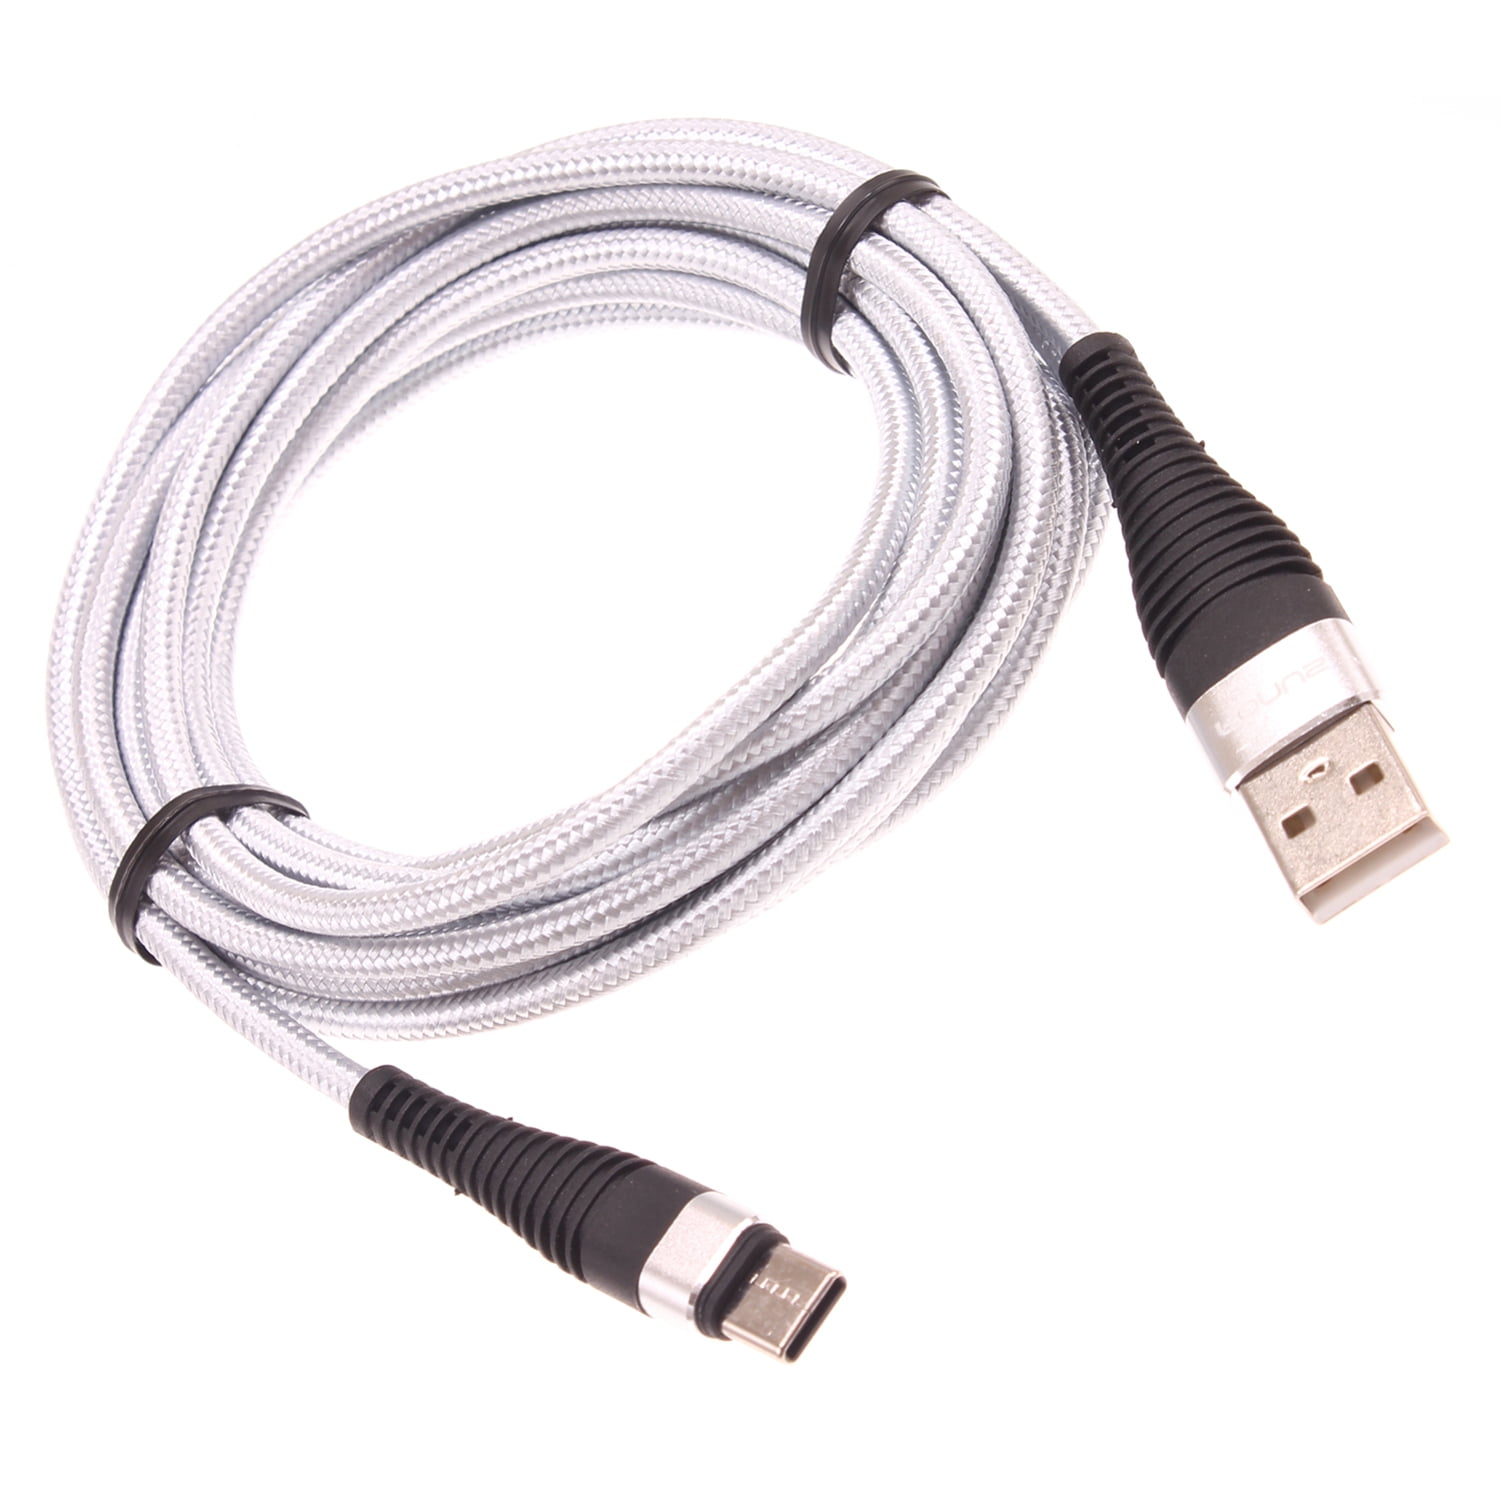 Multi Quick USB Charging Cable,Marble 2 in1 Fast Charger Cord Connector High Speed Durable Charging Cord Compatible with iPhone/Tablets/Samsung Galaxy/iPad and More 